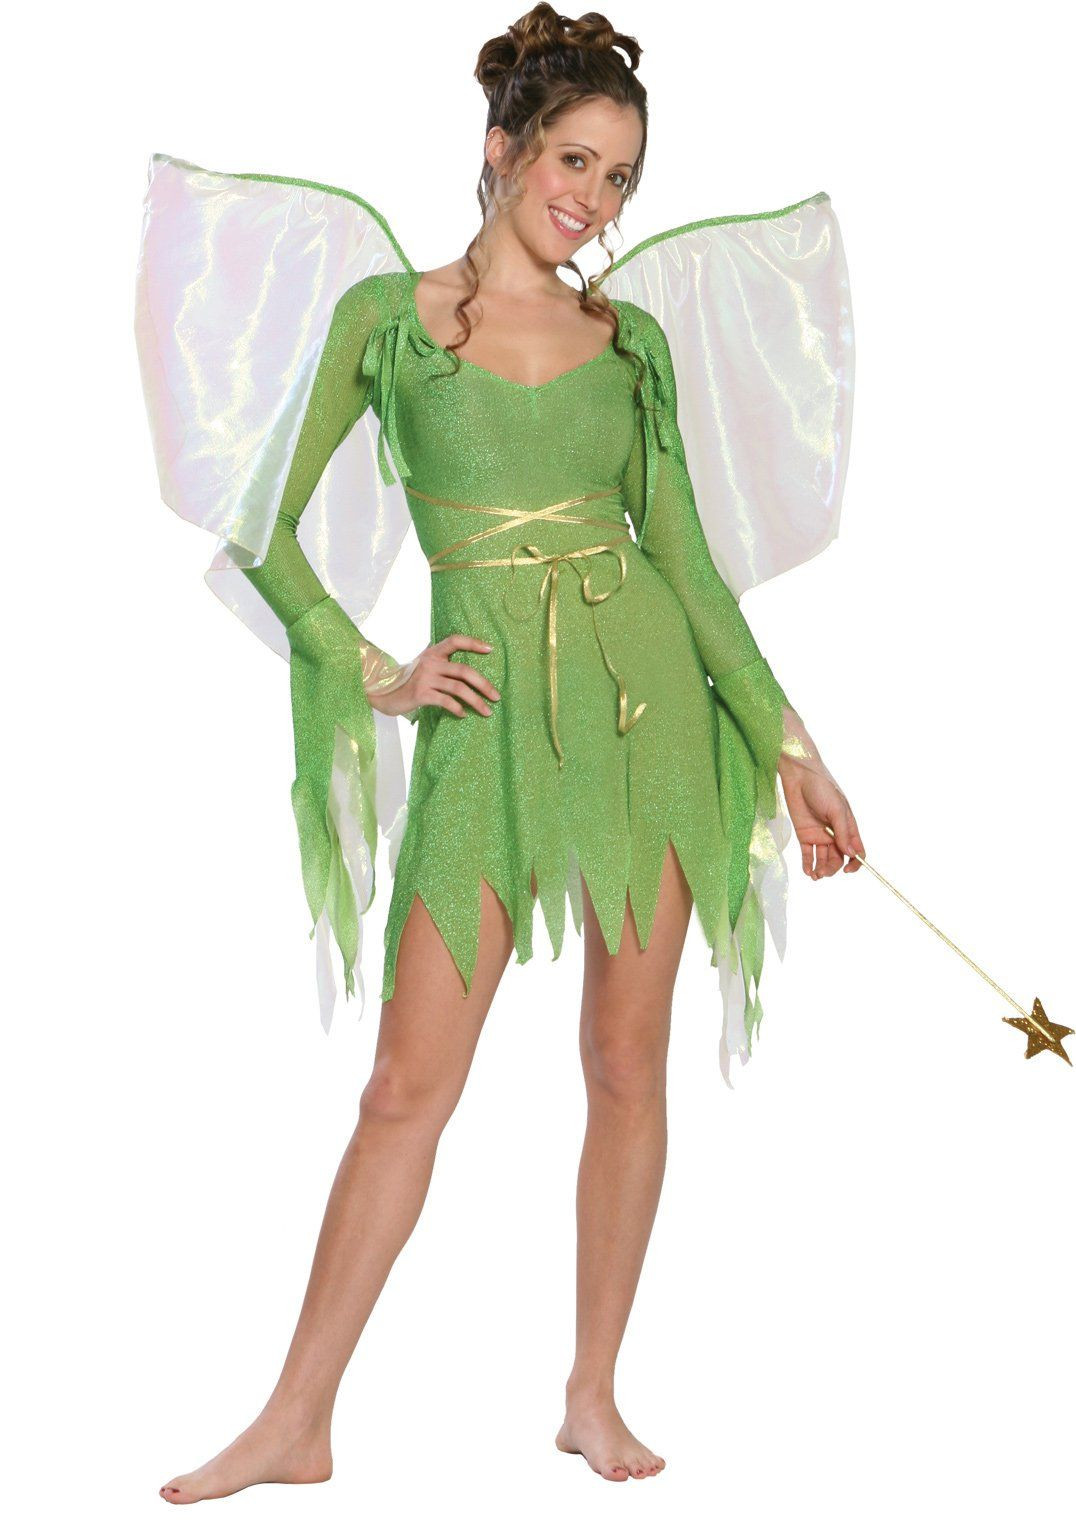 DIY Tinkerbell Costume For Adults
 Pin on costumes